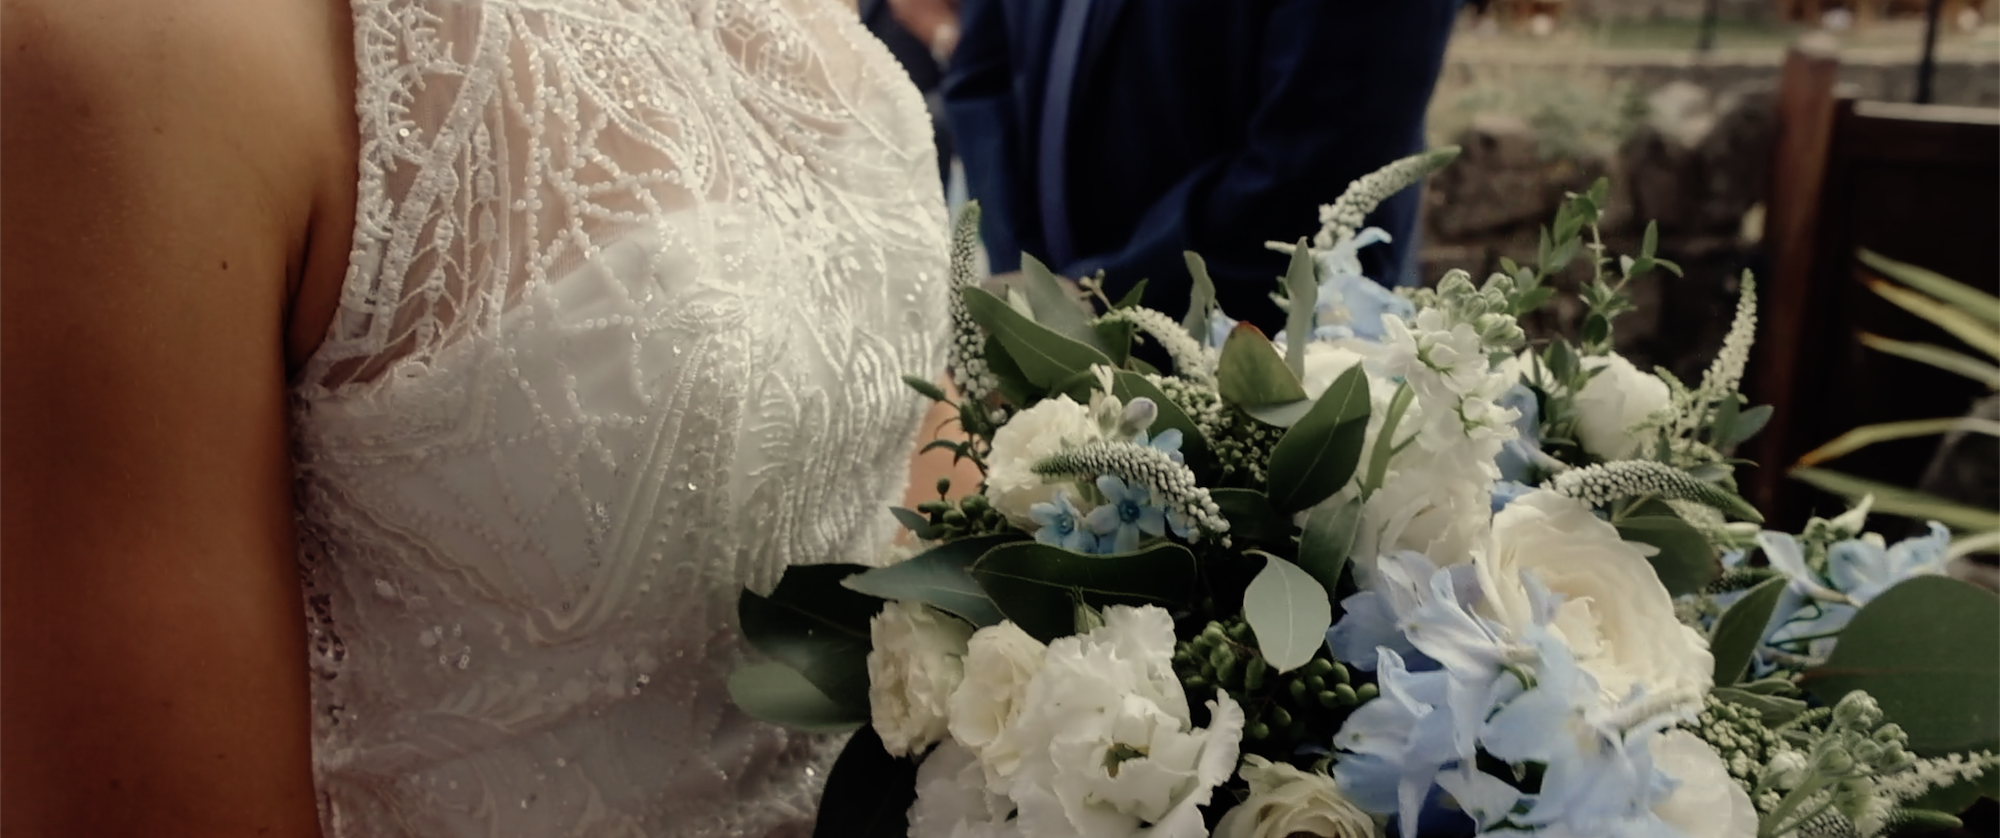 Oxwich Bay Hotel Wedding Videography by Ben Holbrook Films (Swansea South Wales).jpeg21.png